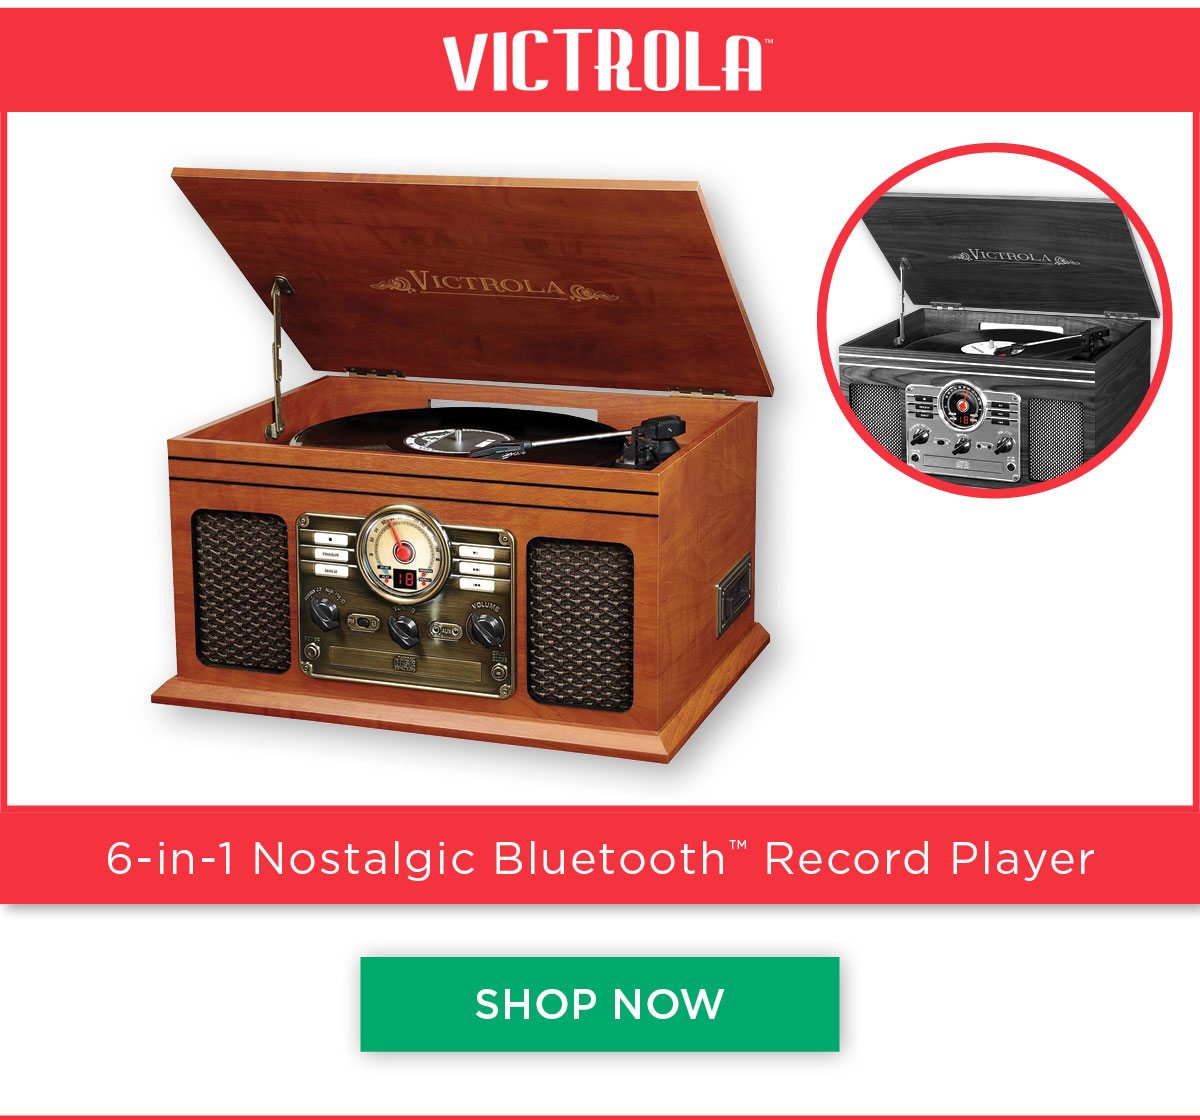 Victrola - 6-in1 Nostalgic Bluetooth Record Play in Mahogany or Grey